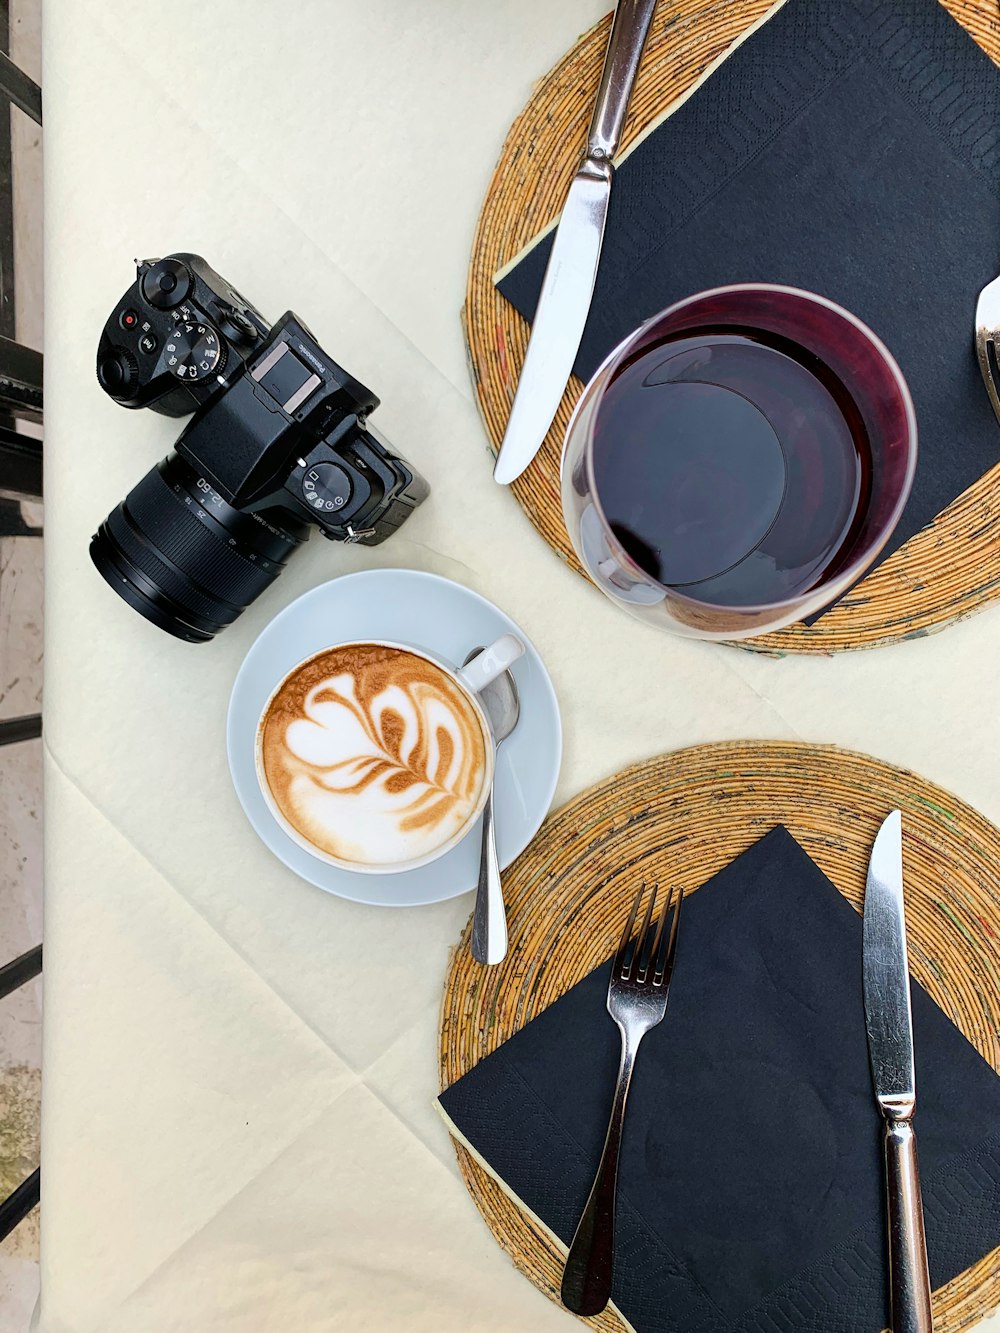 black dslr camera beside white ceramic cup with brown liquid